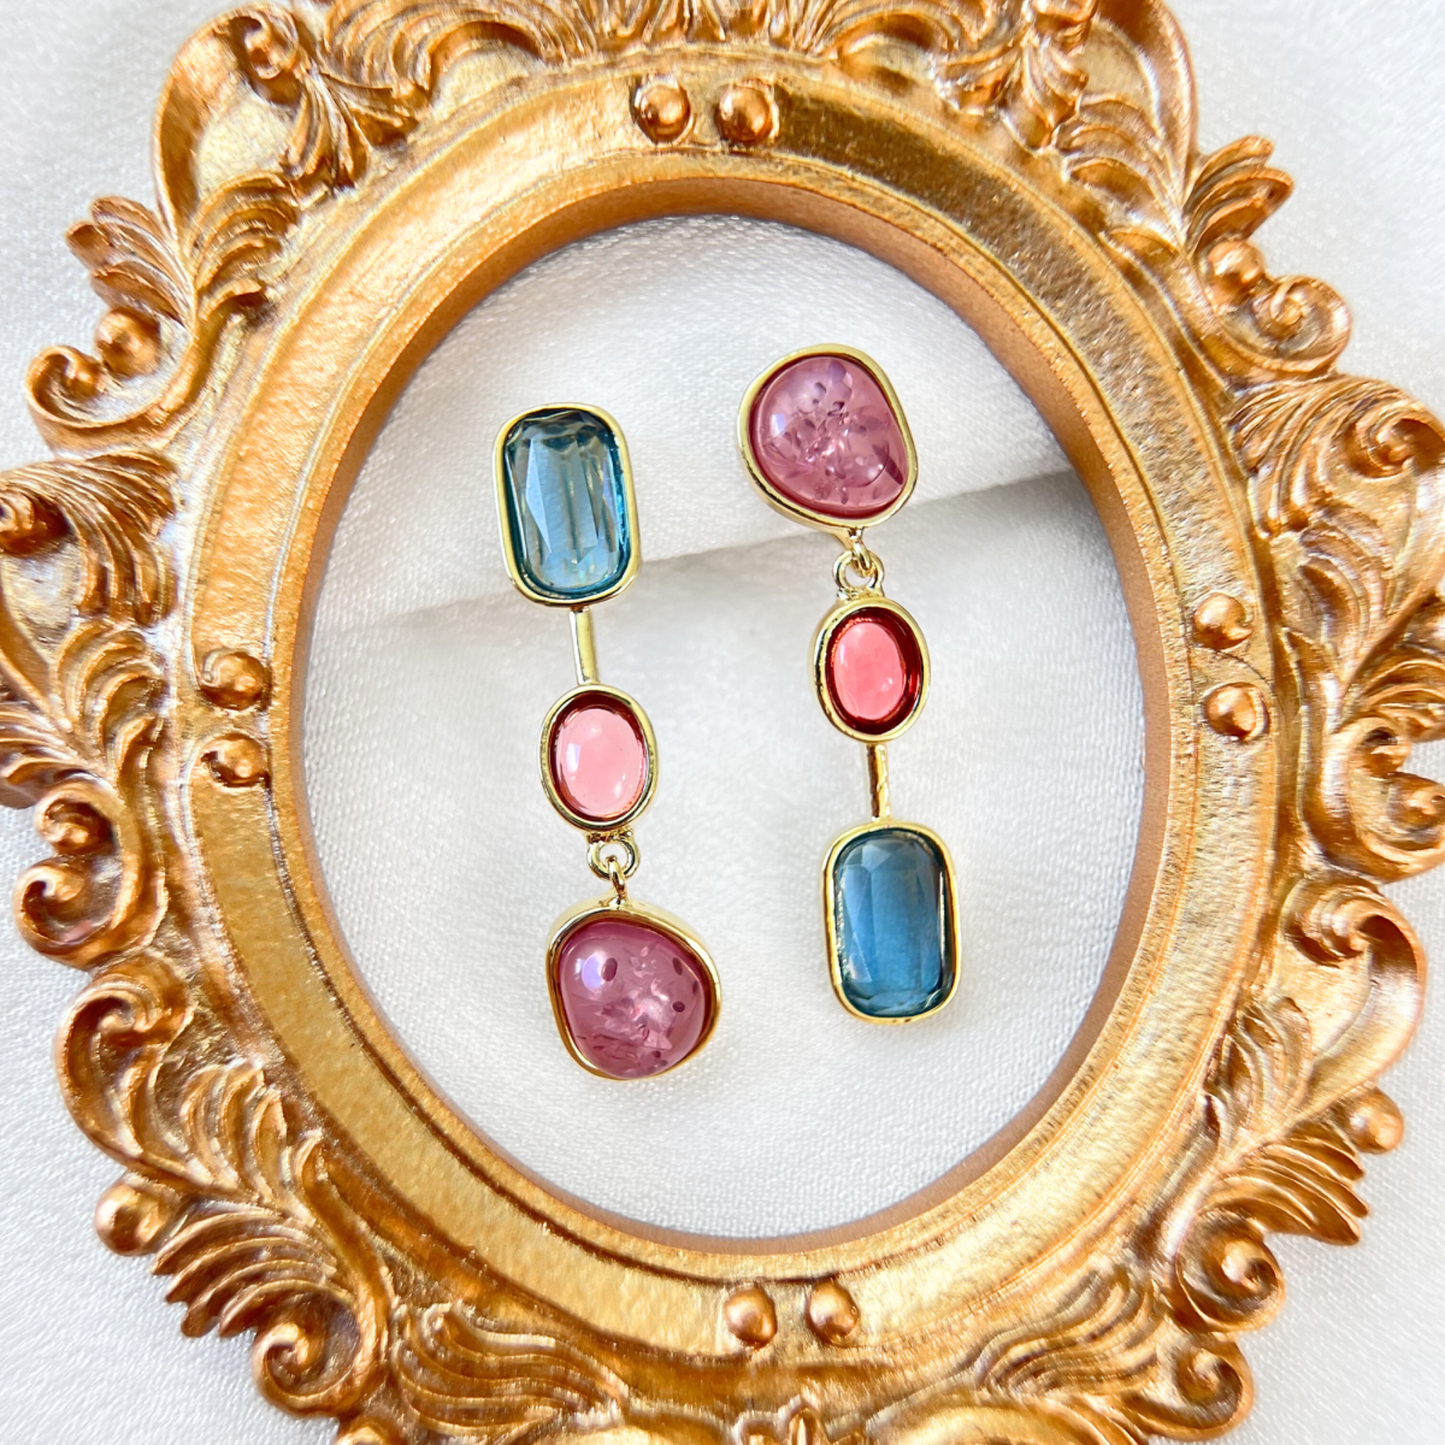 Mismatched Color Gemstone Clip On Earrings | Pink & Blue